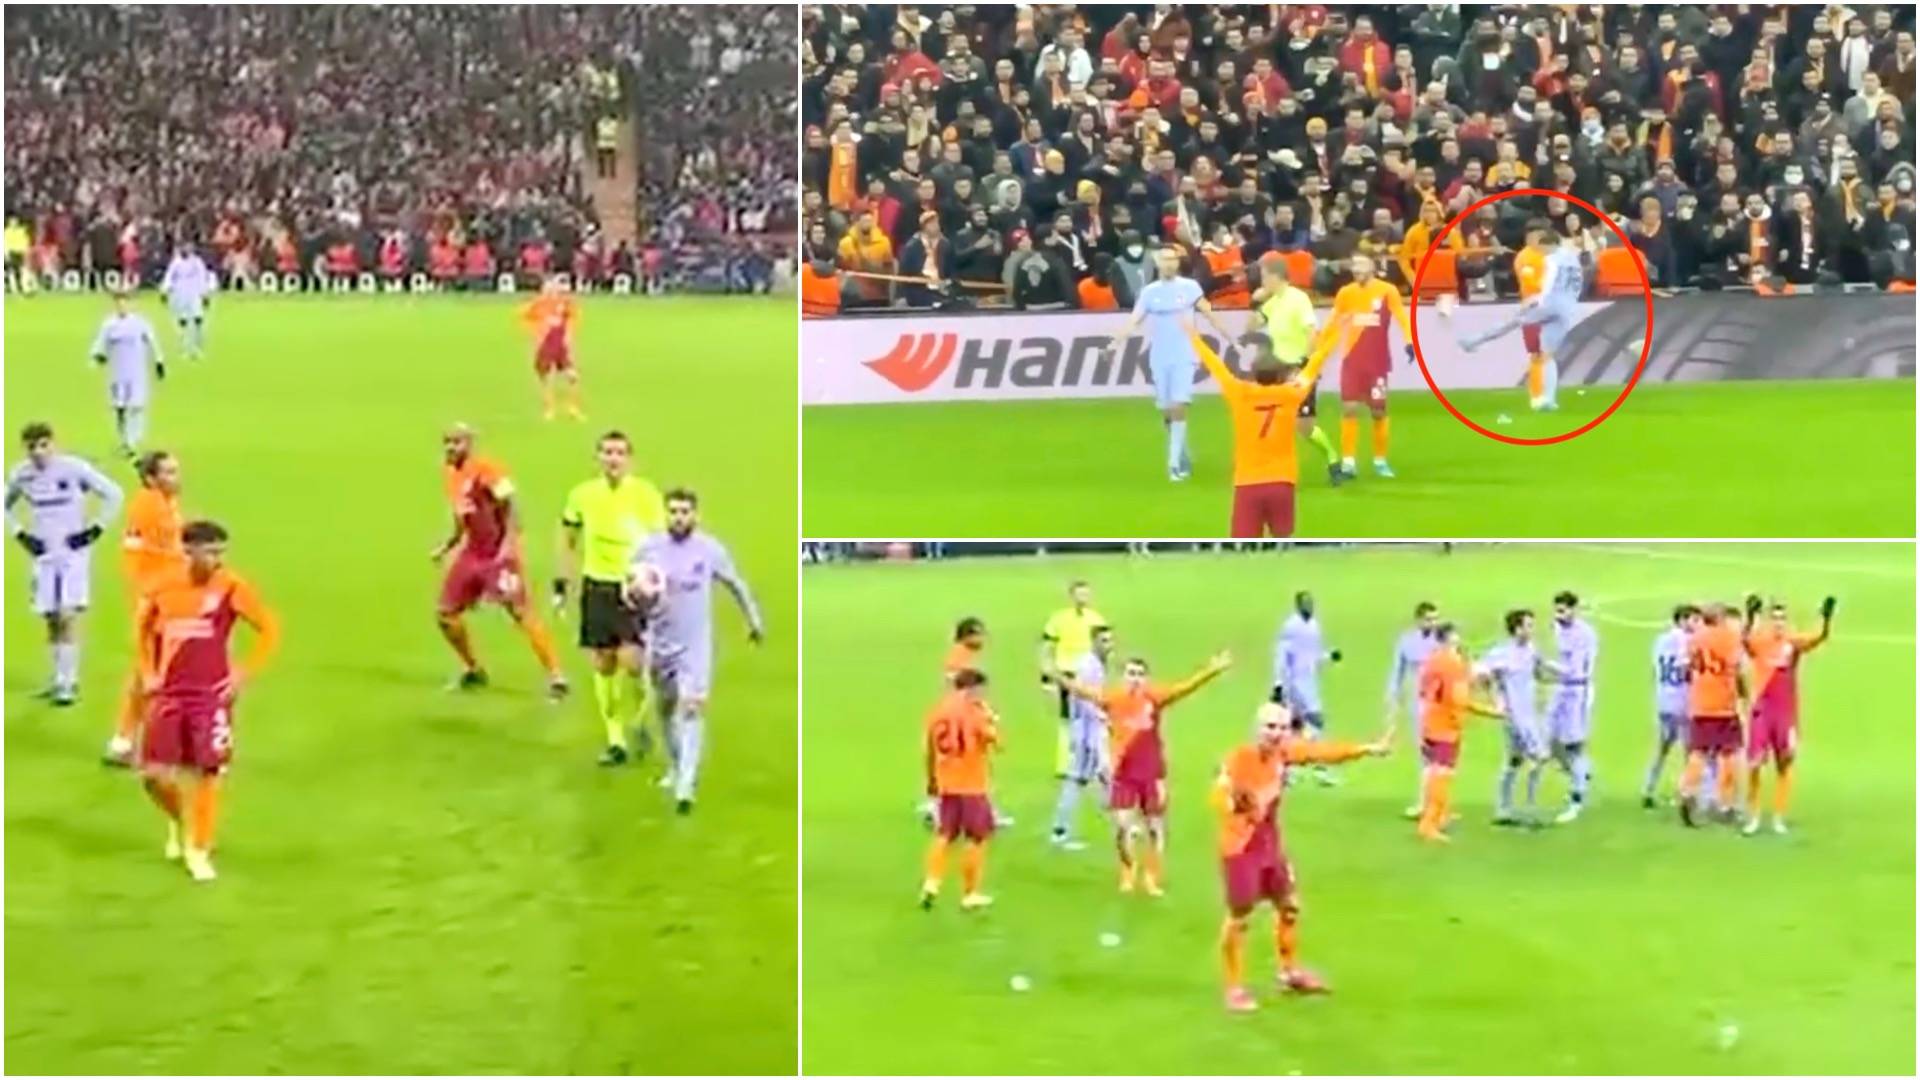 Wild scenes as Jordi Alba loses it with Galatasaray’s fans and boots ball at them